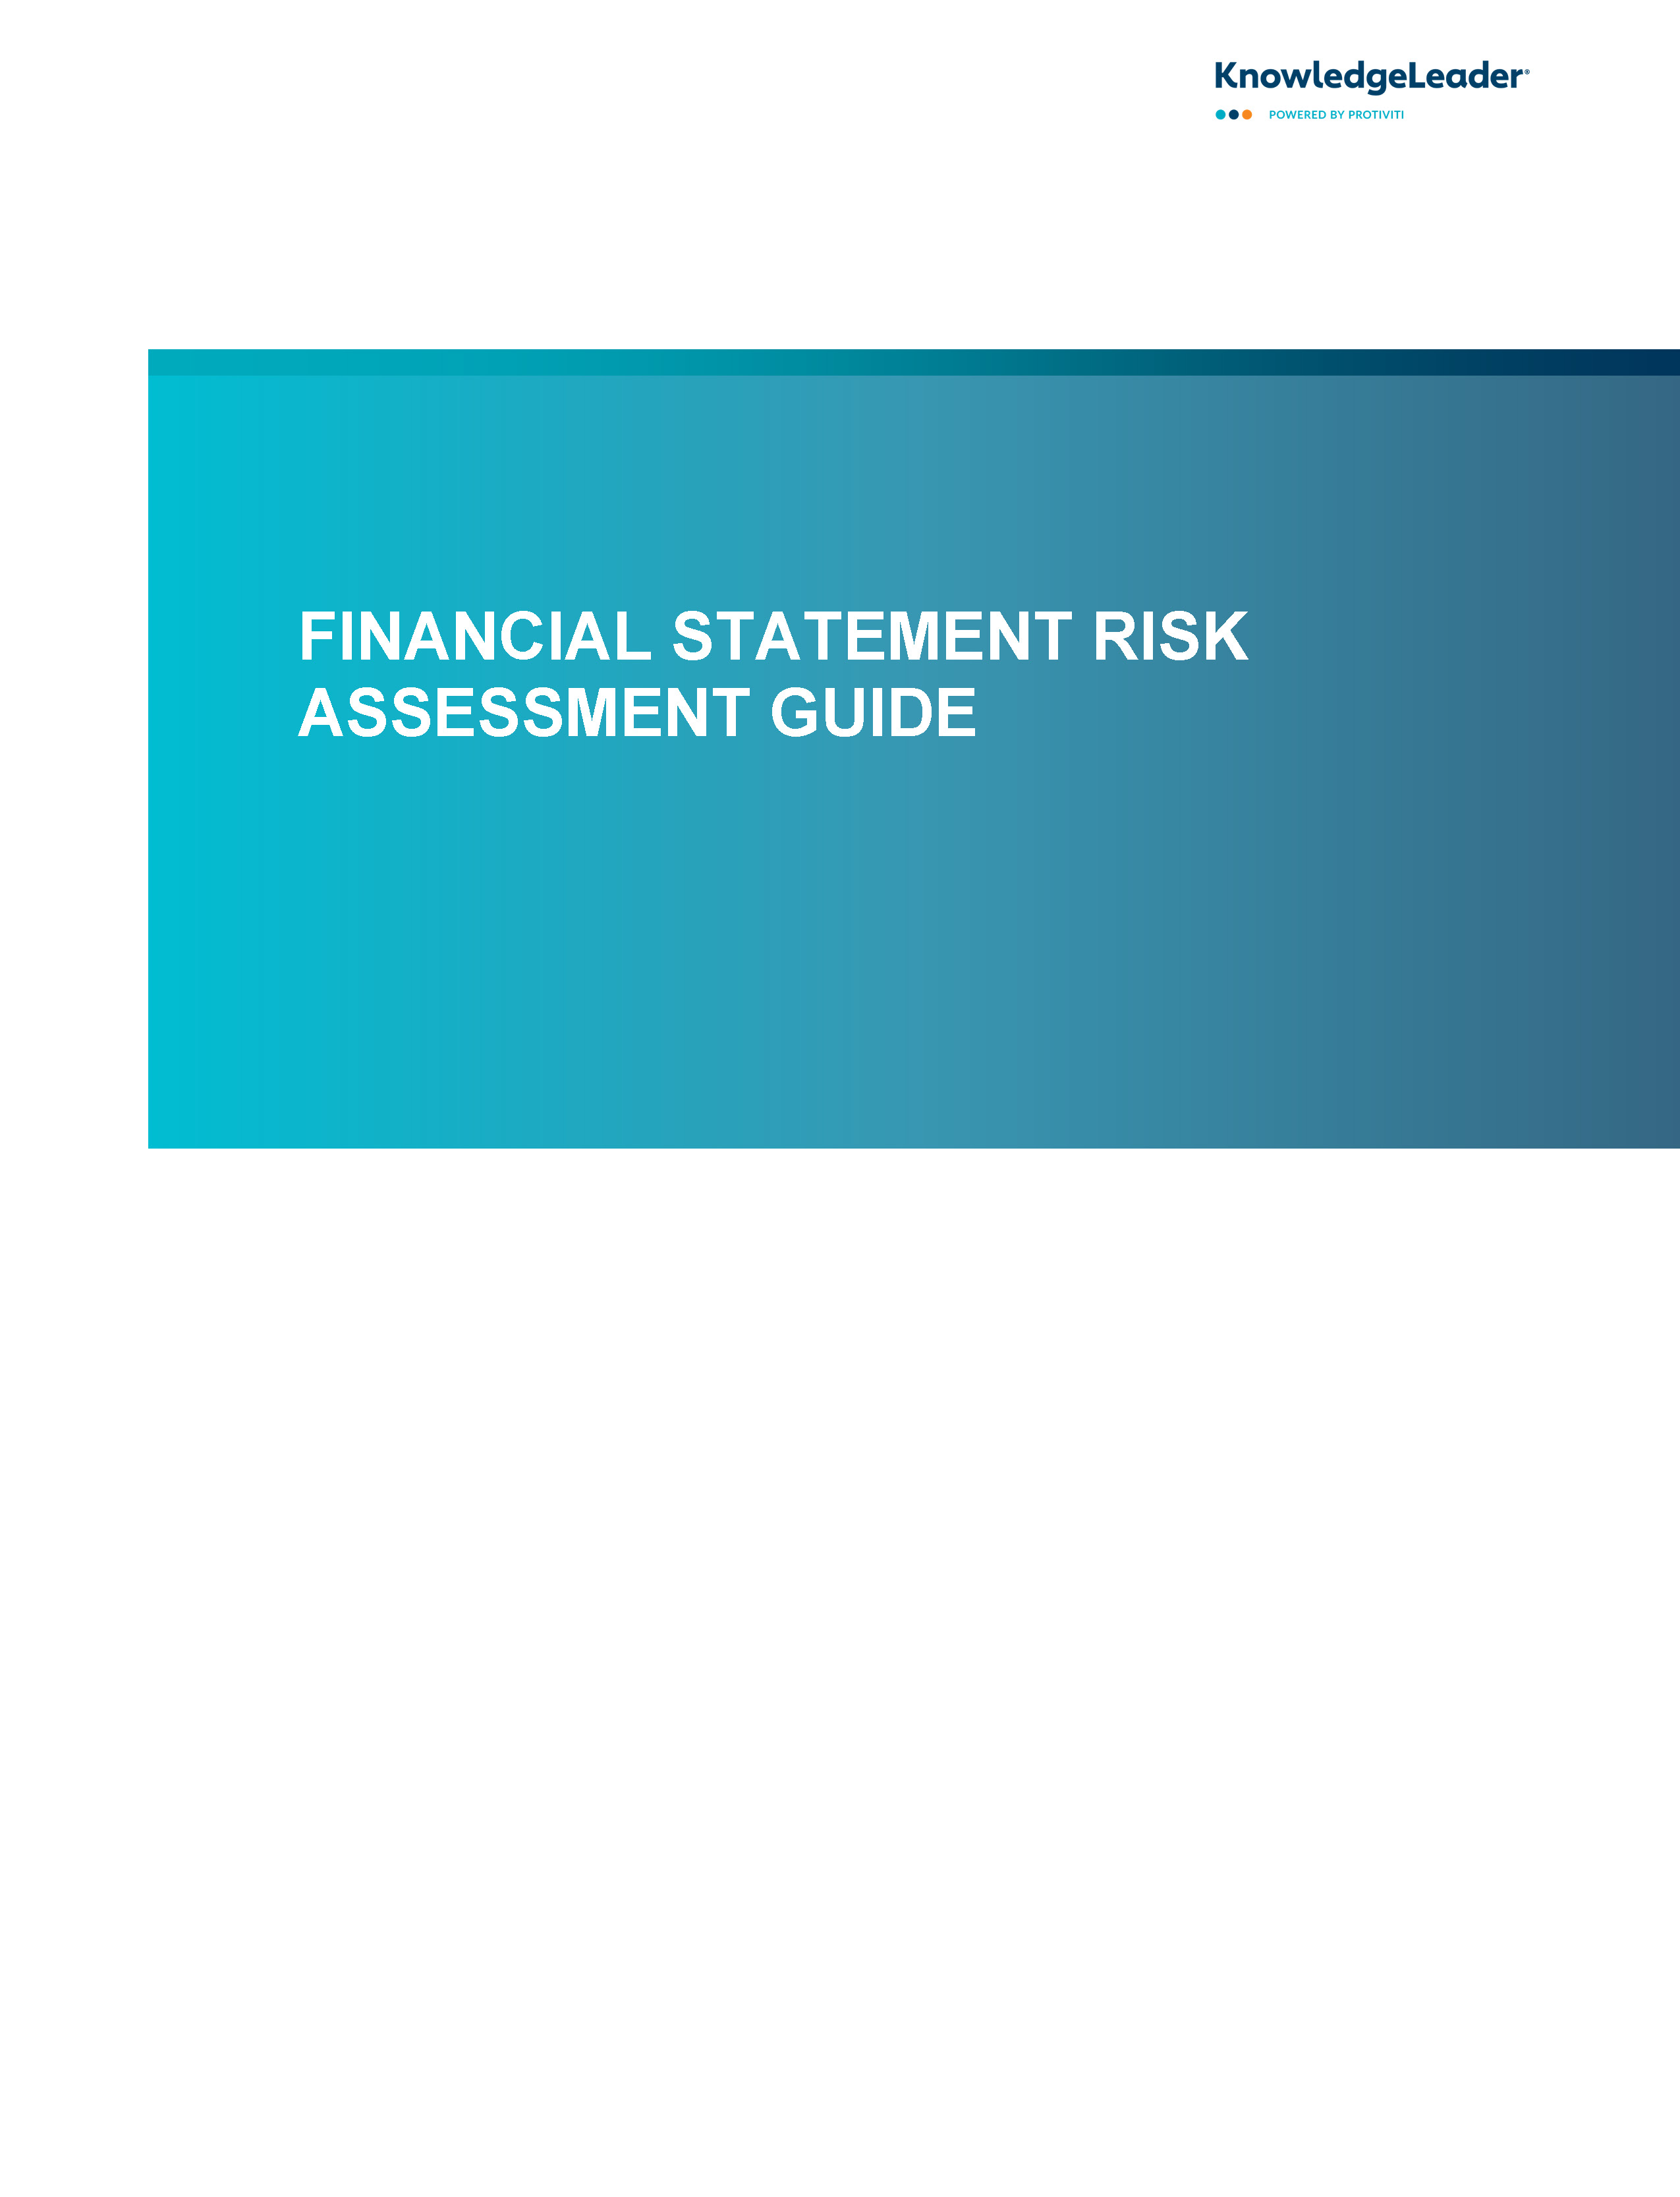 Screenshot of the first page of Financial Statement Risk Assessment Guide